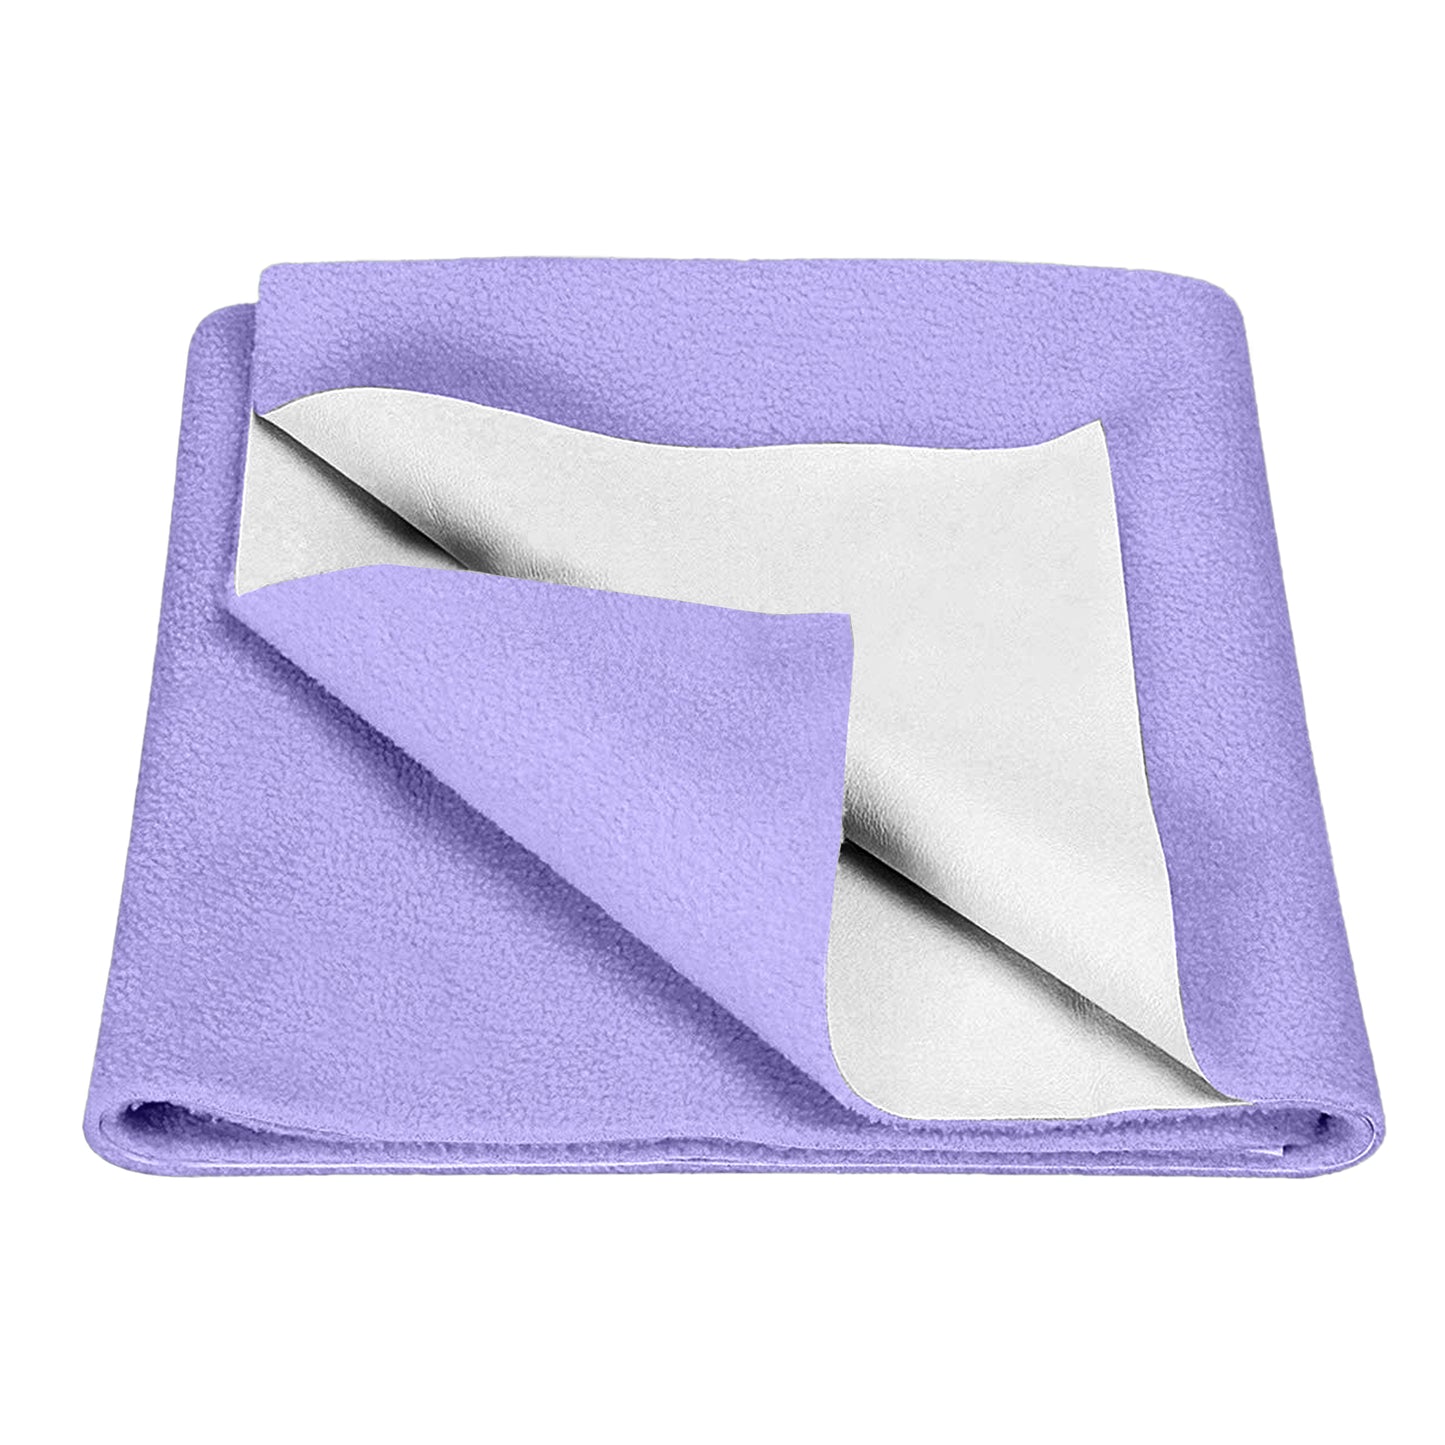 Waterproof Bed Protector, Extra Absorbent Quick Dry Sheet, Baby Bed Protector (70 X 50 CM), Pack of 2 -LILAC